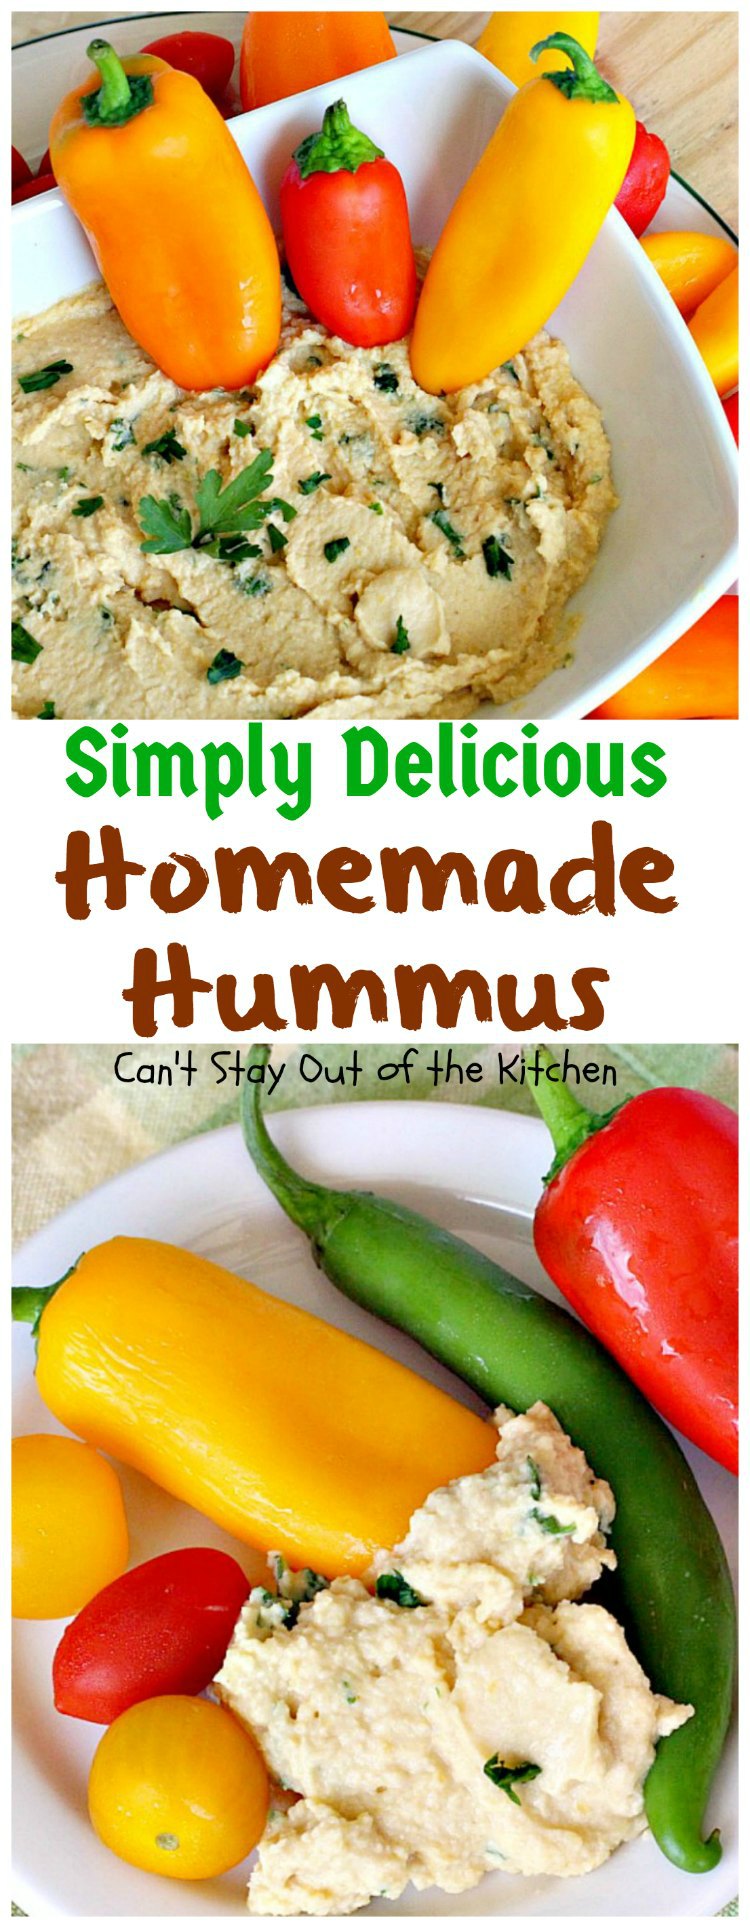 Simply Delicious Homemade Hummus | Can't Stay Out of the Kitchen